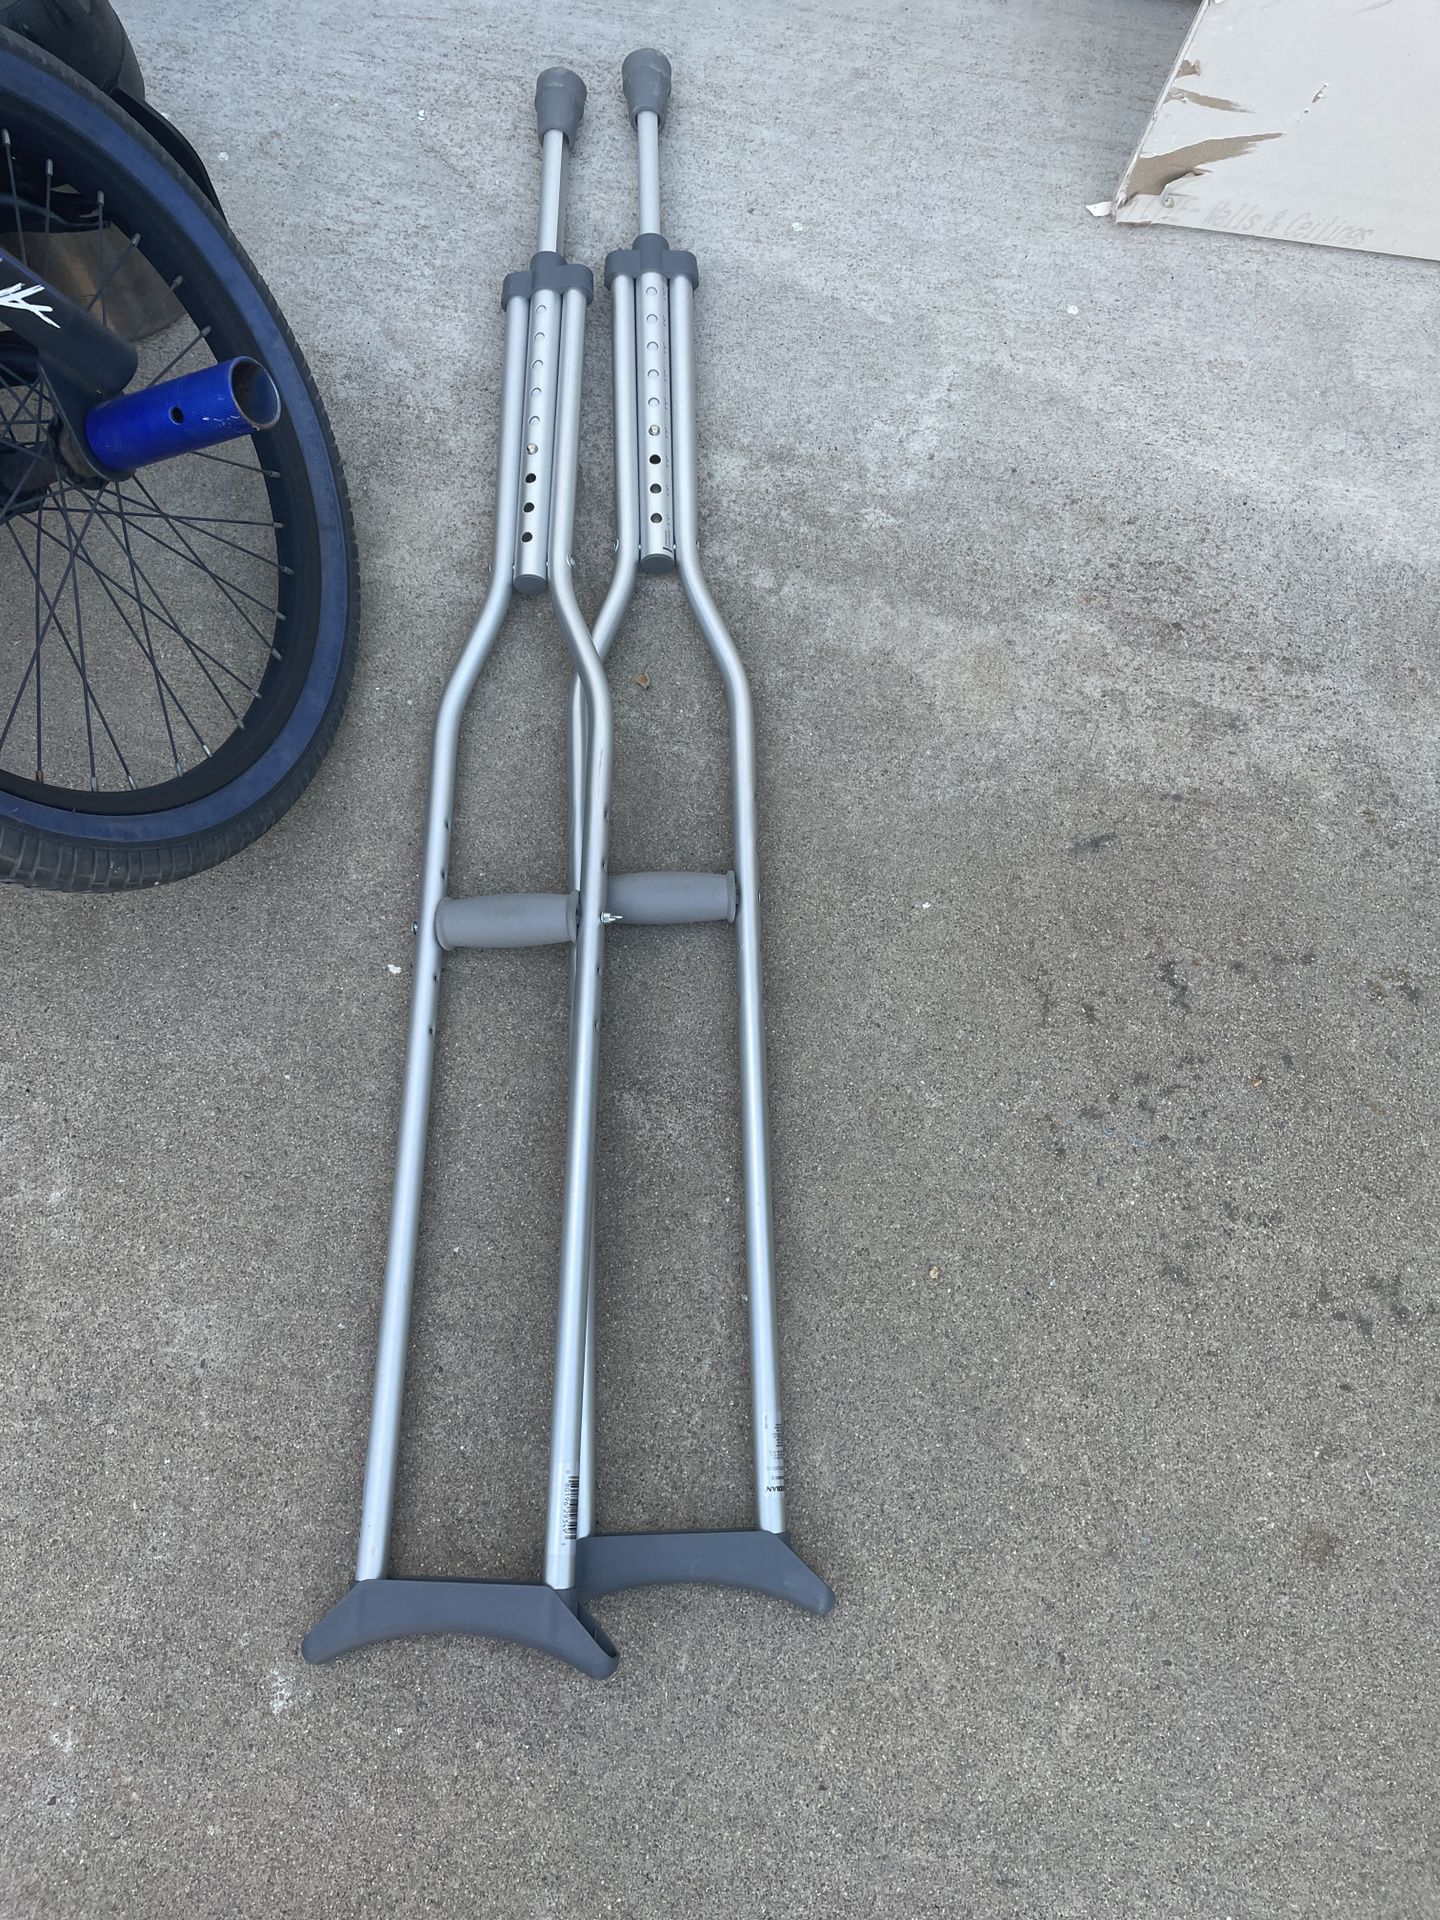 crutches for walking